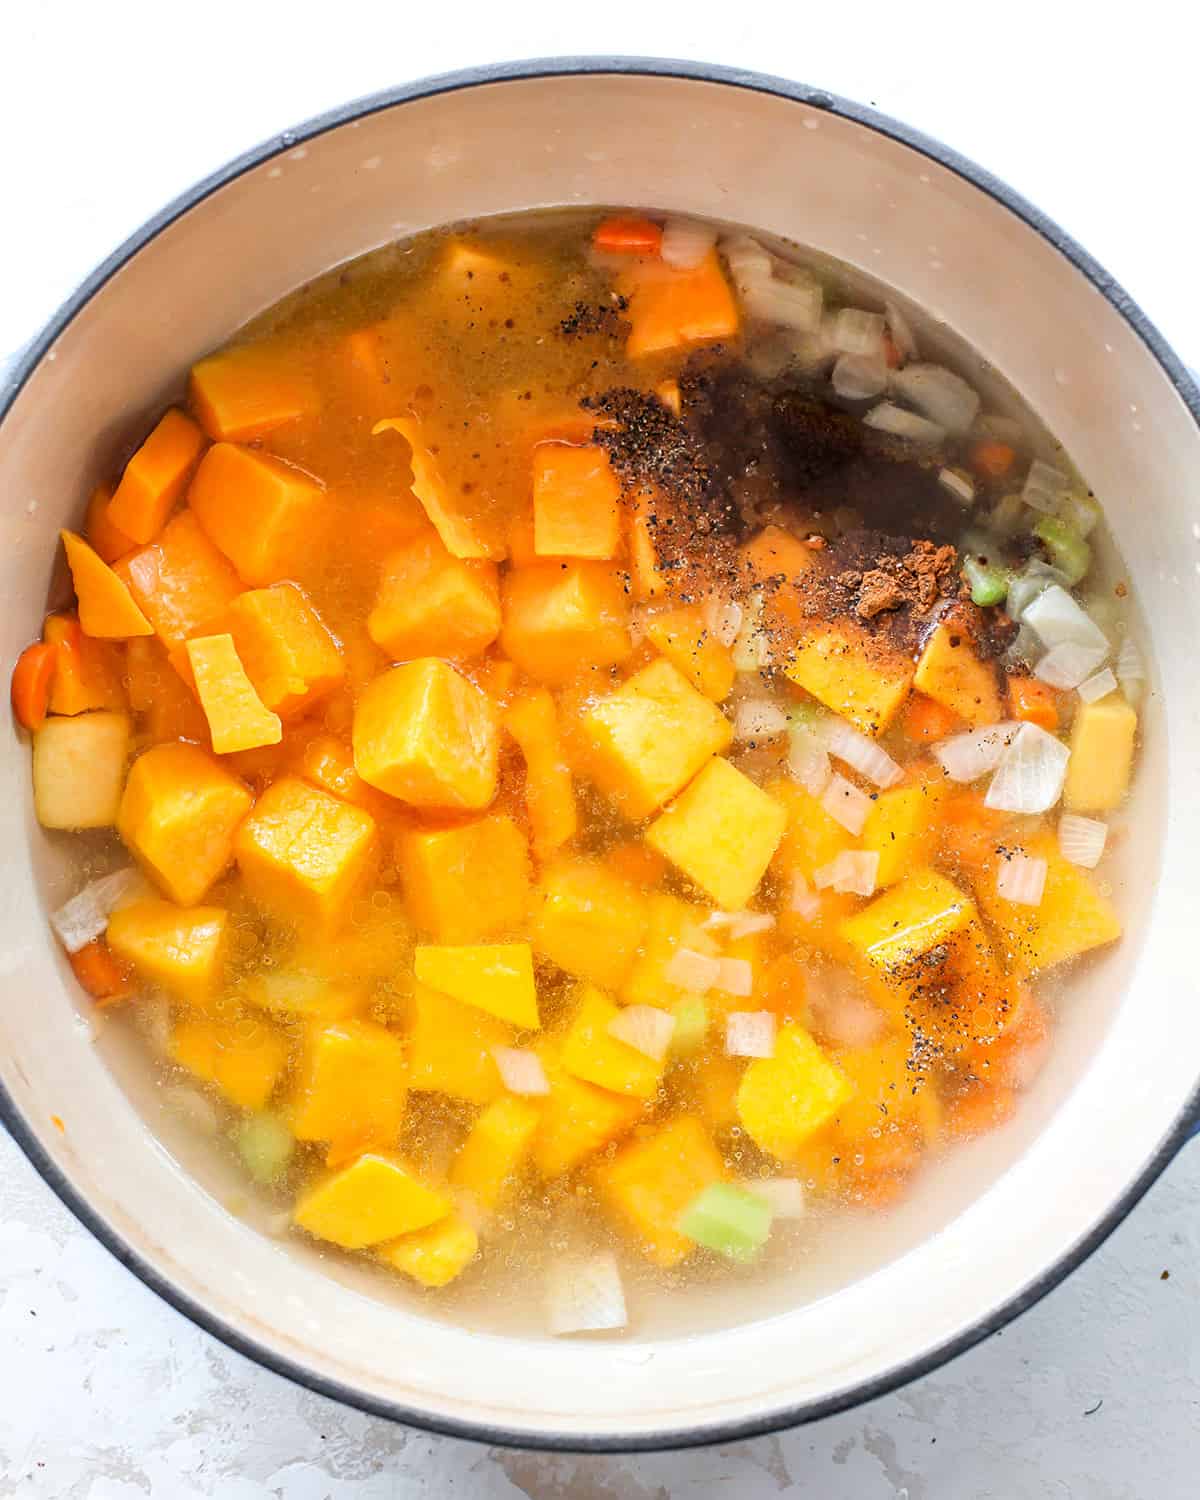 How to Make Butternut Squash Soup - adding squash and other ingredients before stirring